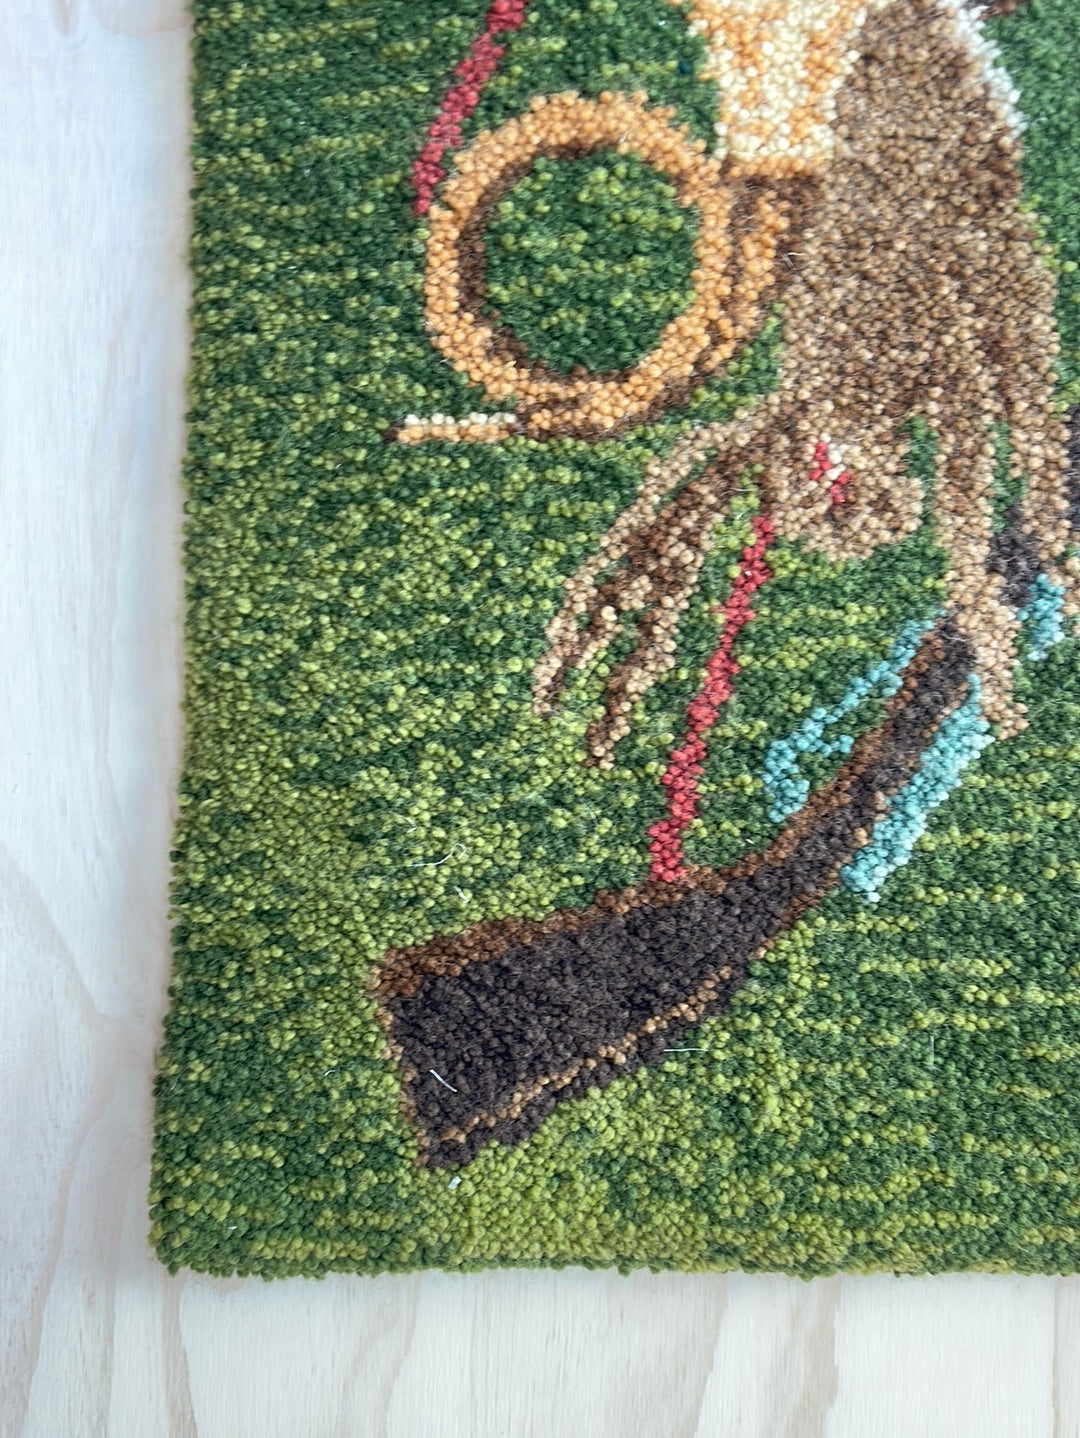 Green Woven Wall Hanging with Rabbit